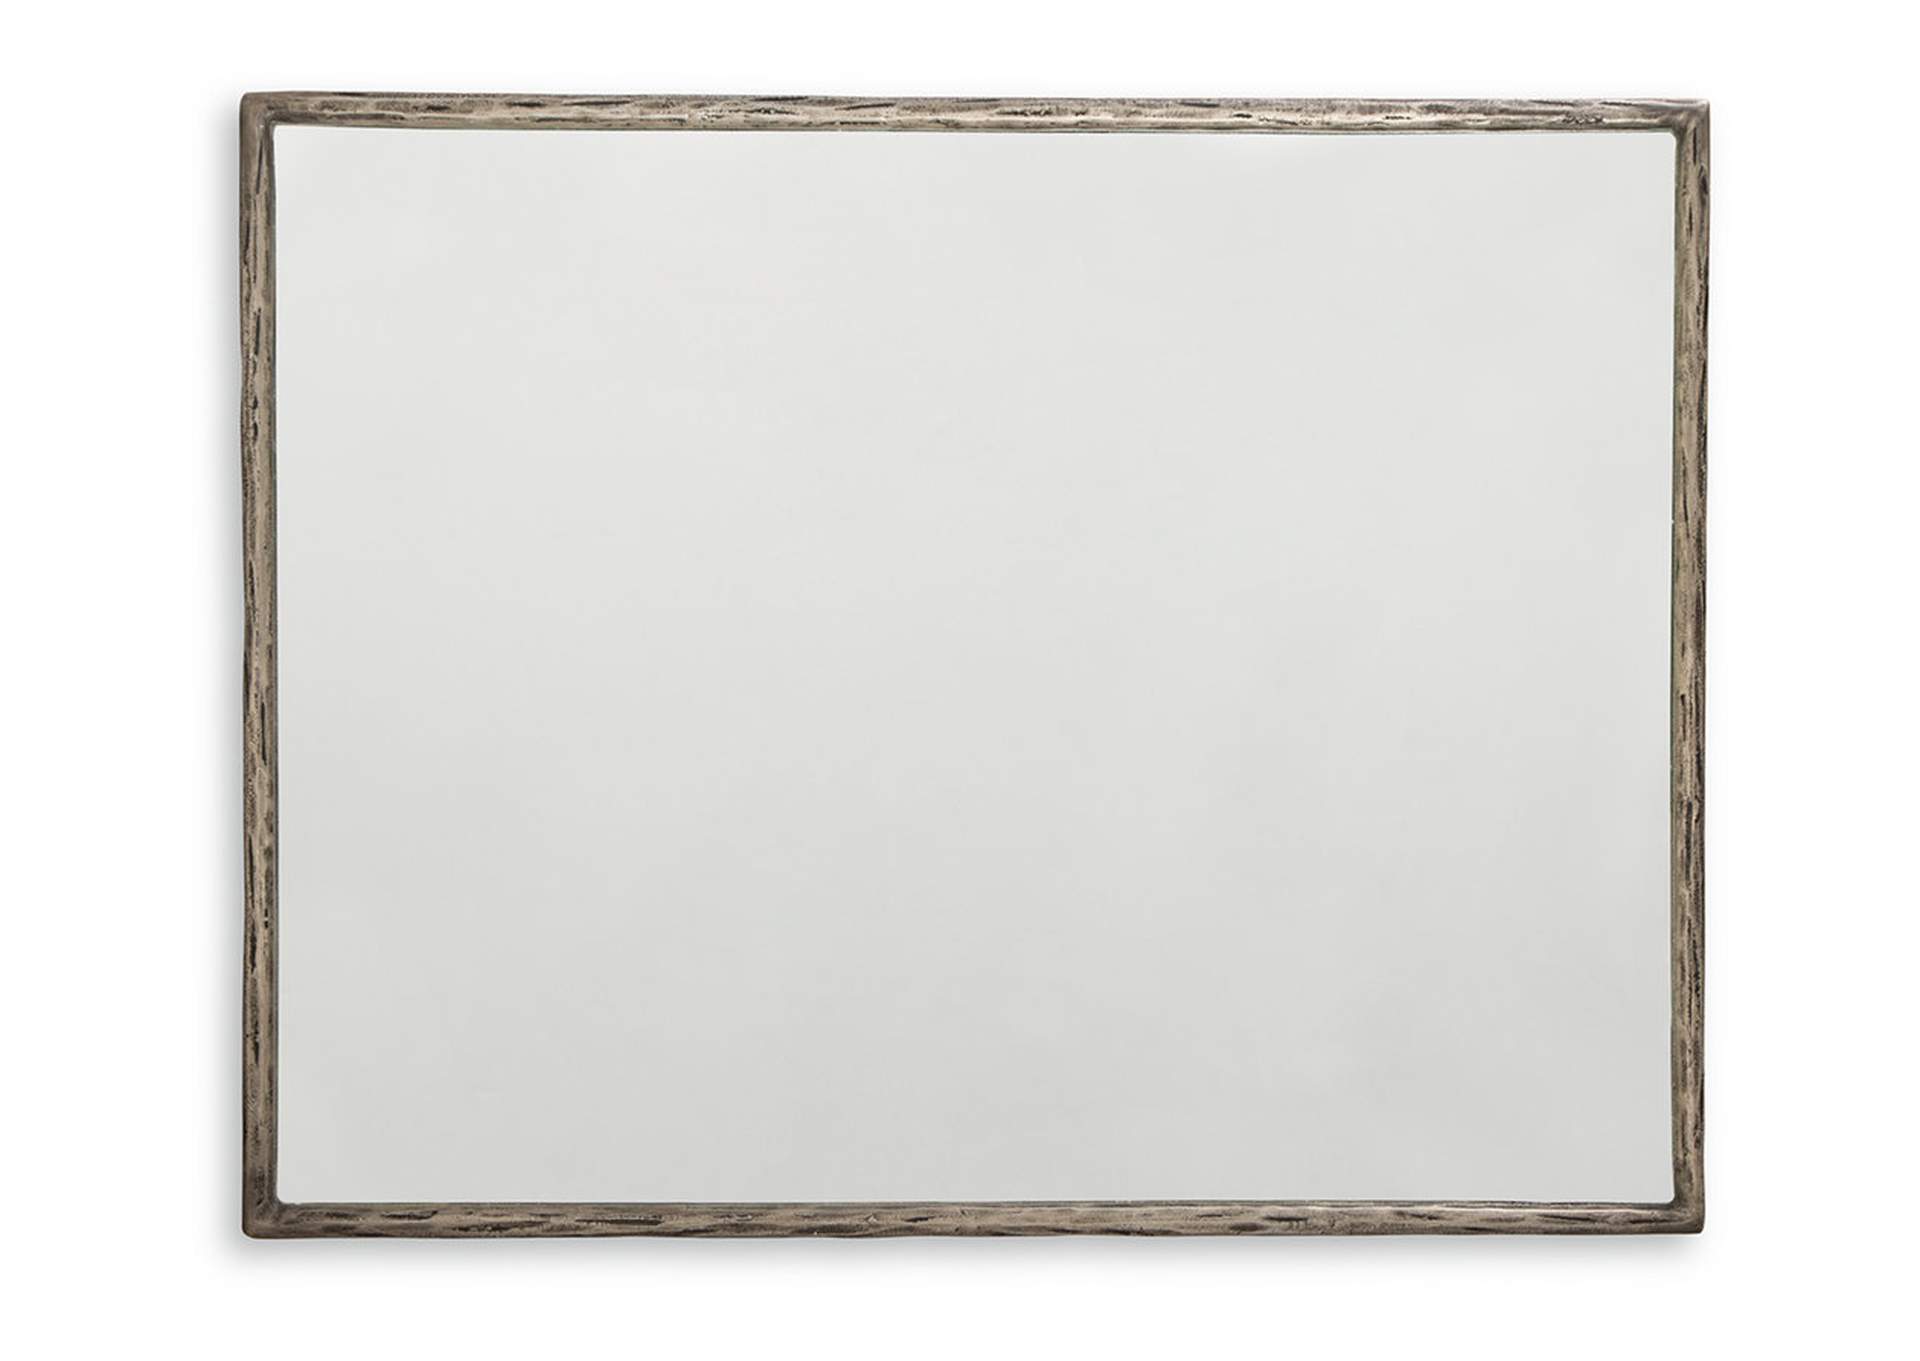 Ryandale Accent Mirror,Signature Design By Ashley